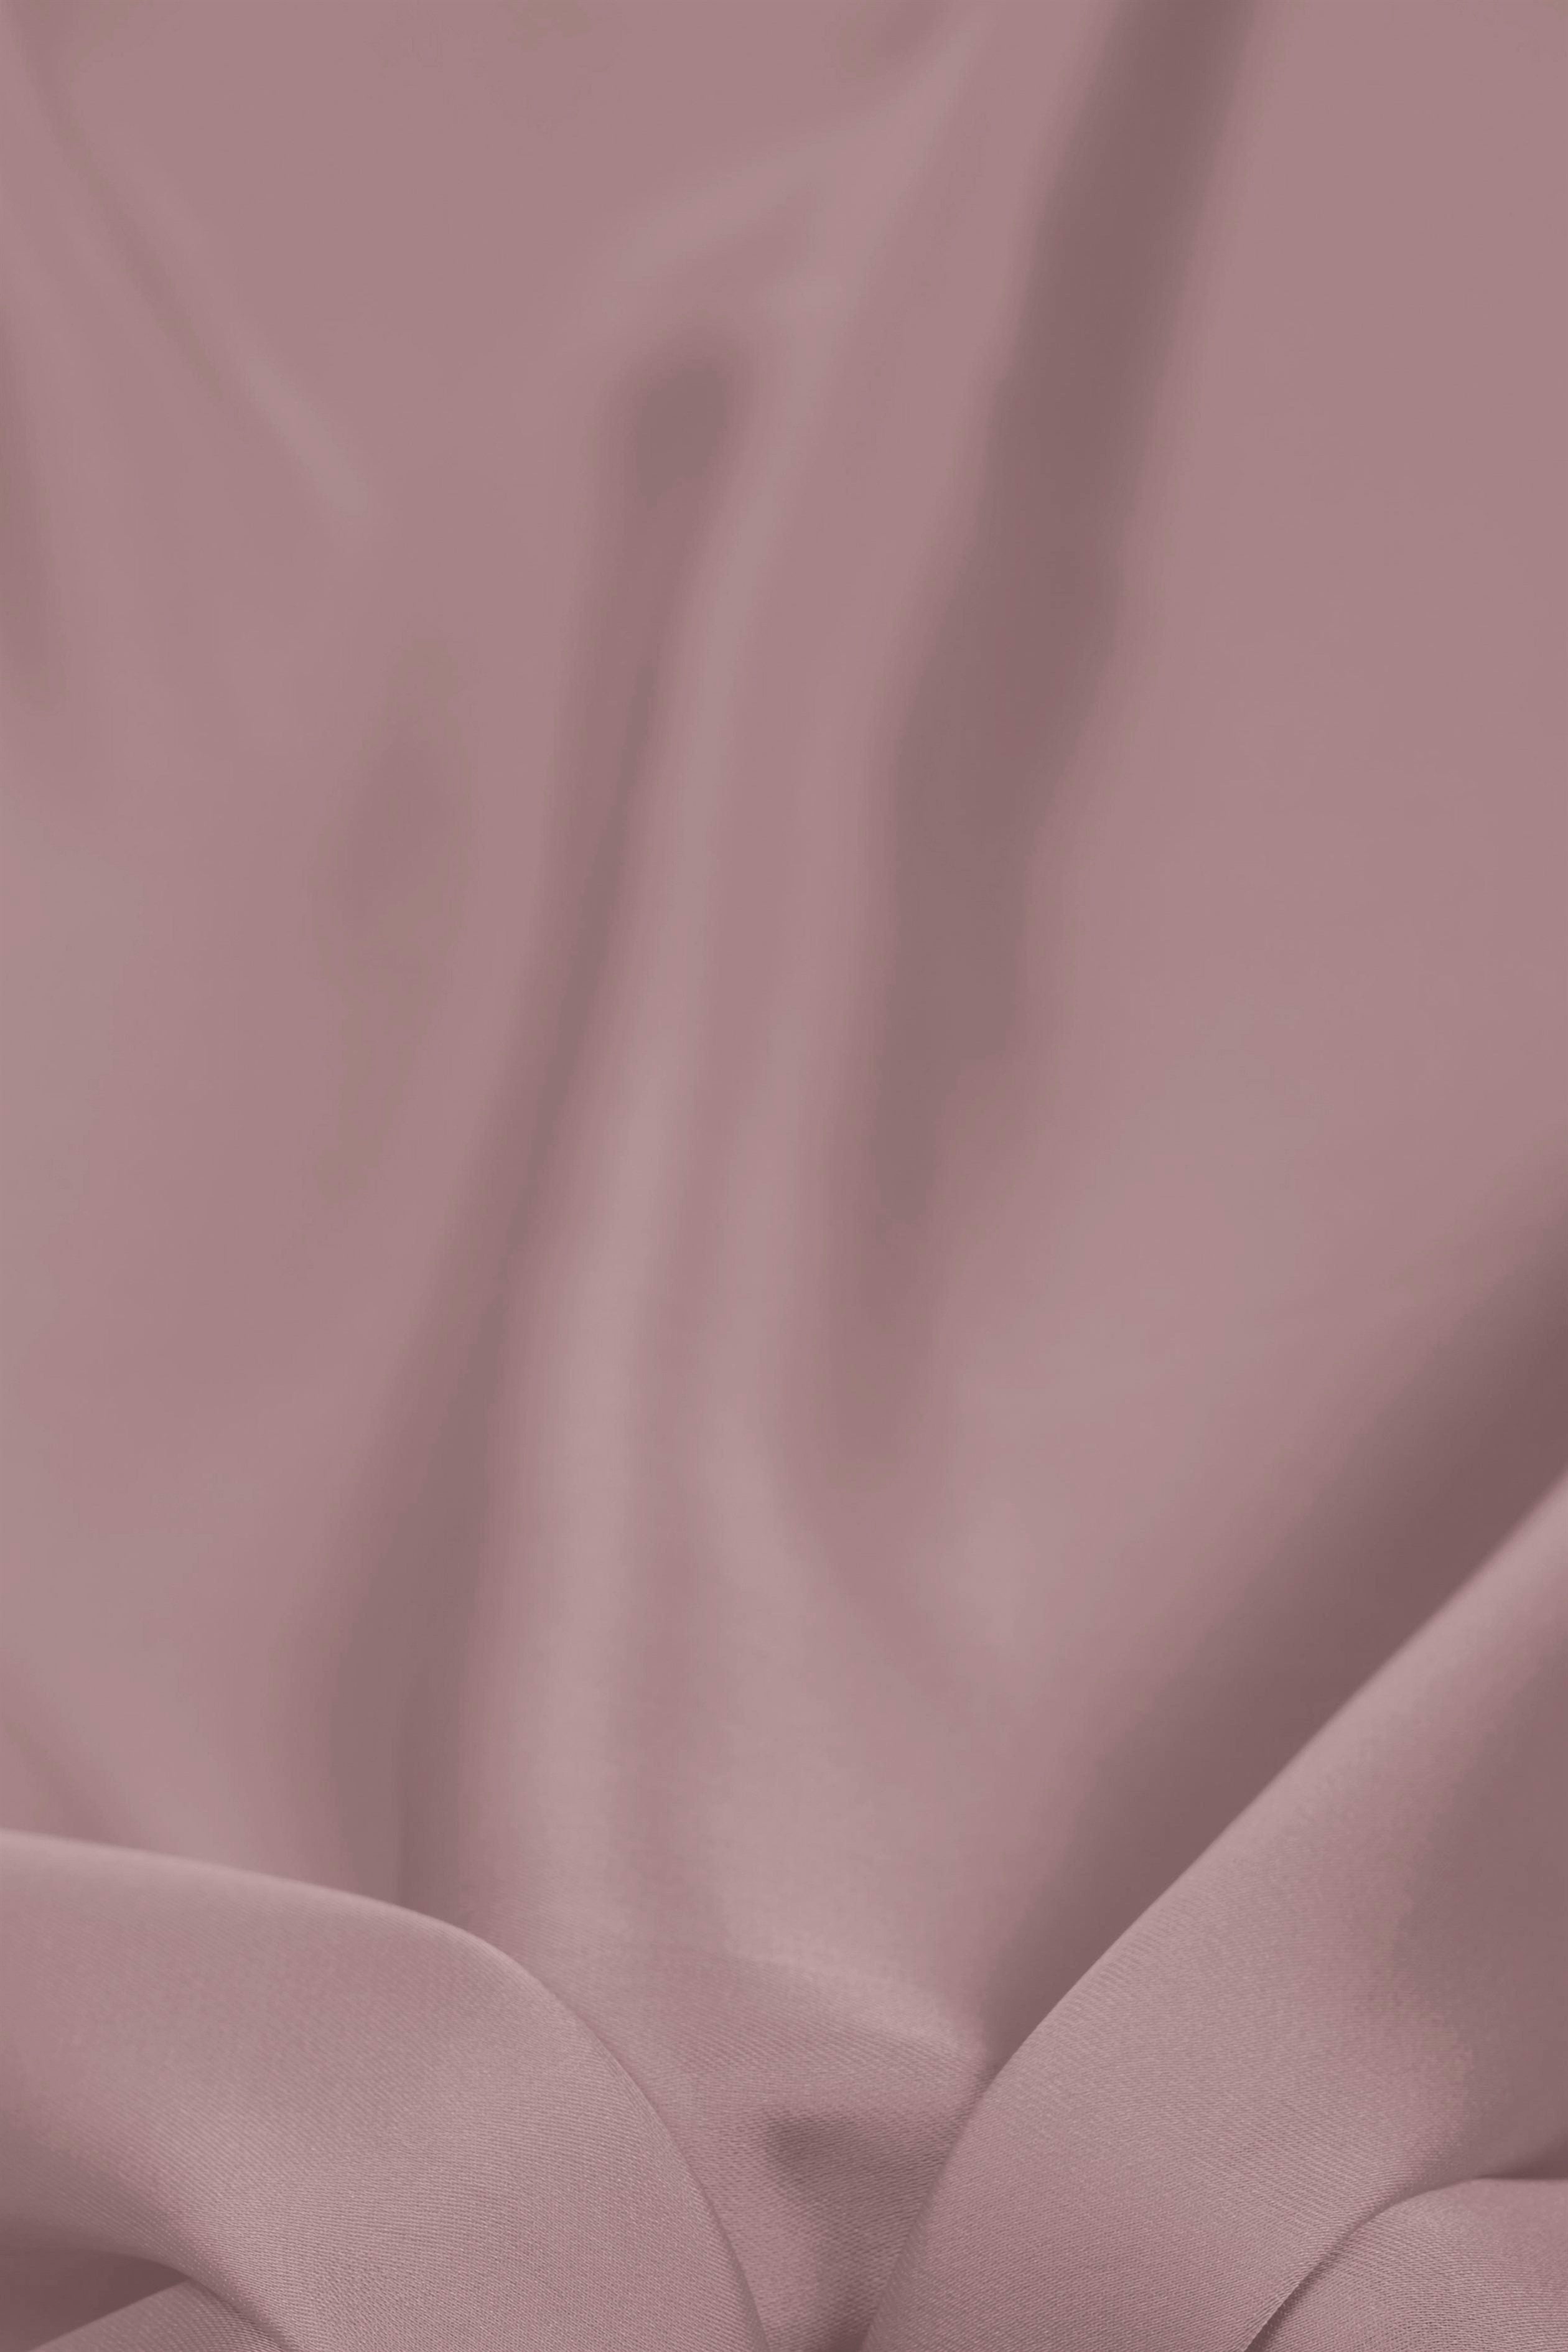 Pastel Pink Plain Dyed Satin Georgette Fabric